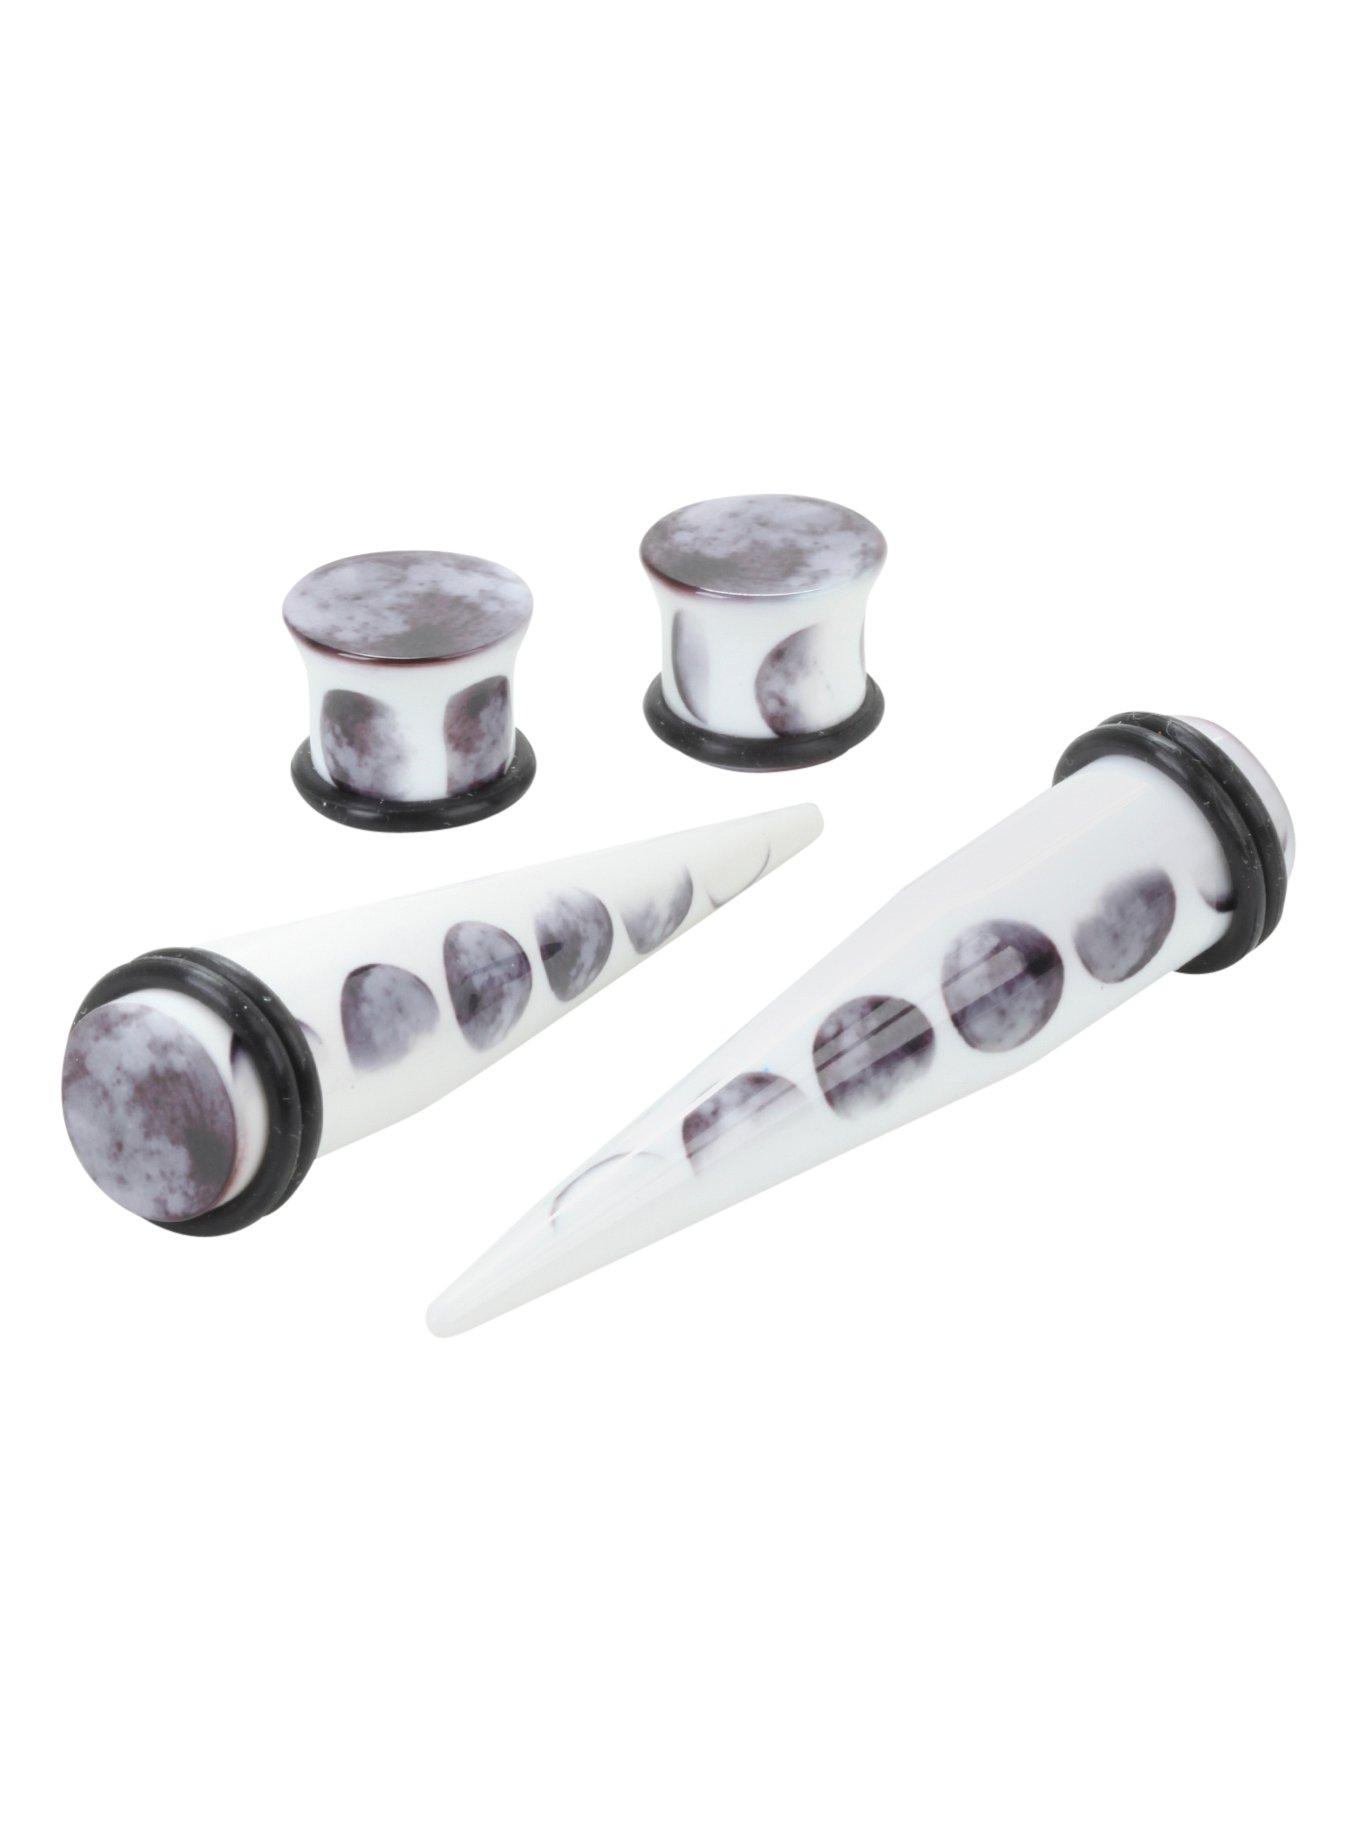 Acrylic Moon Phase Taper & Plug 4 Pack, , hi-res